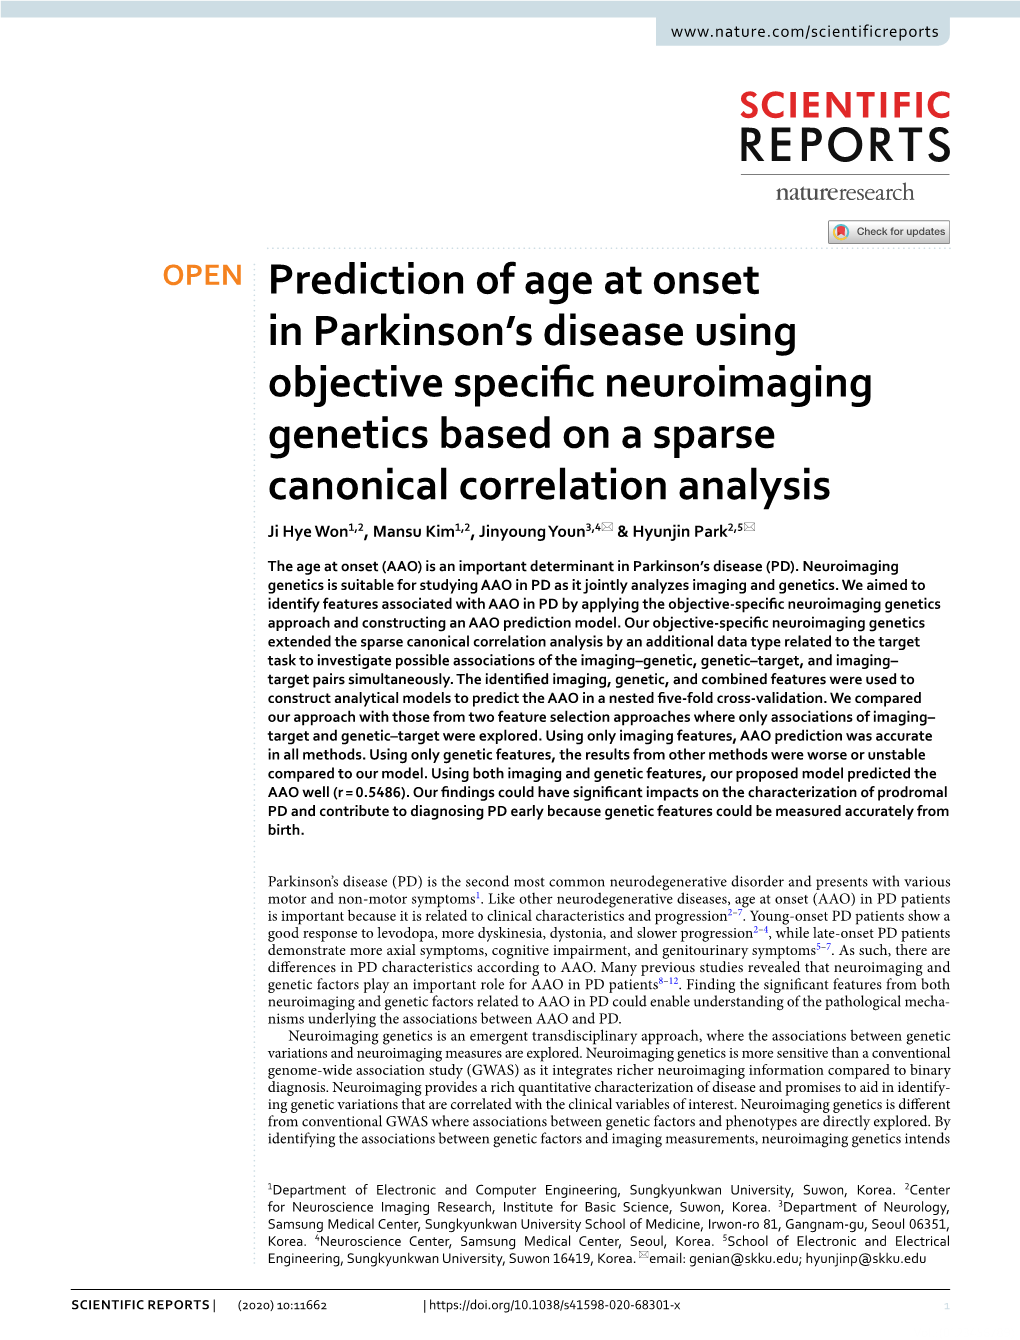 Prediction of Age at Onset in Parkinson's Disease Using Objective